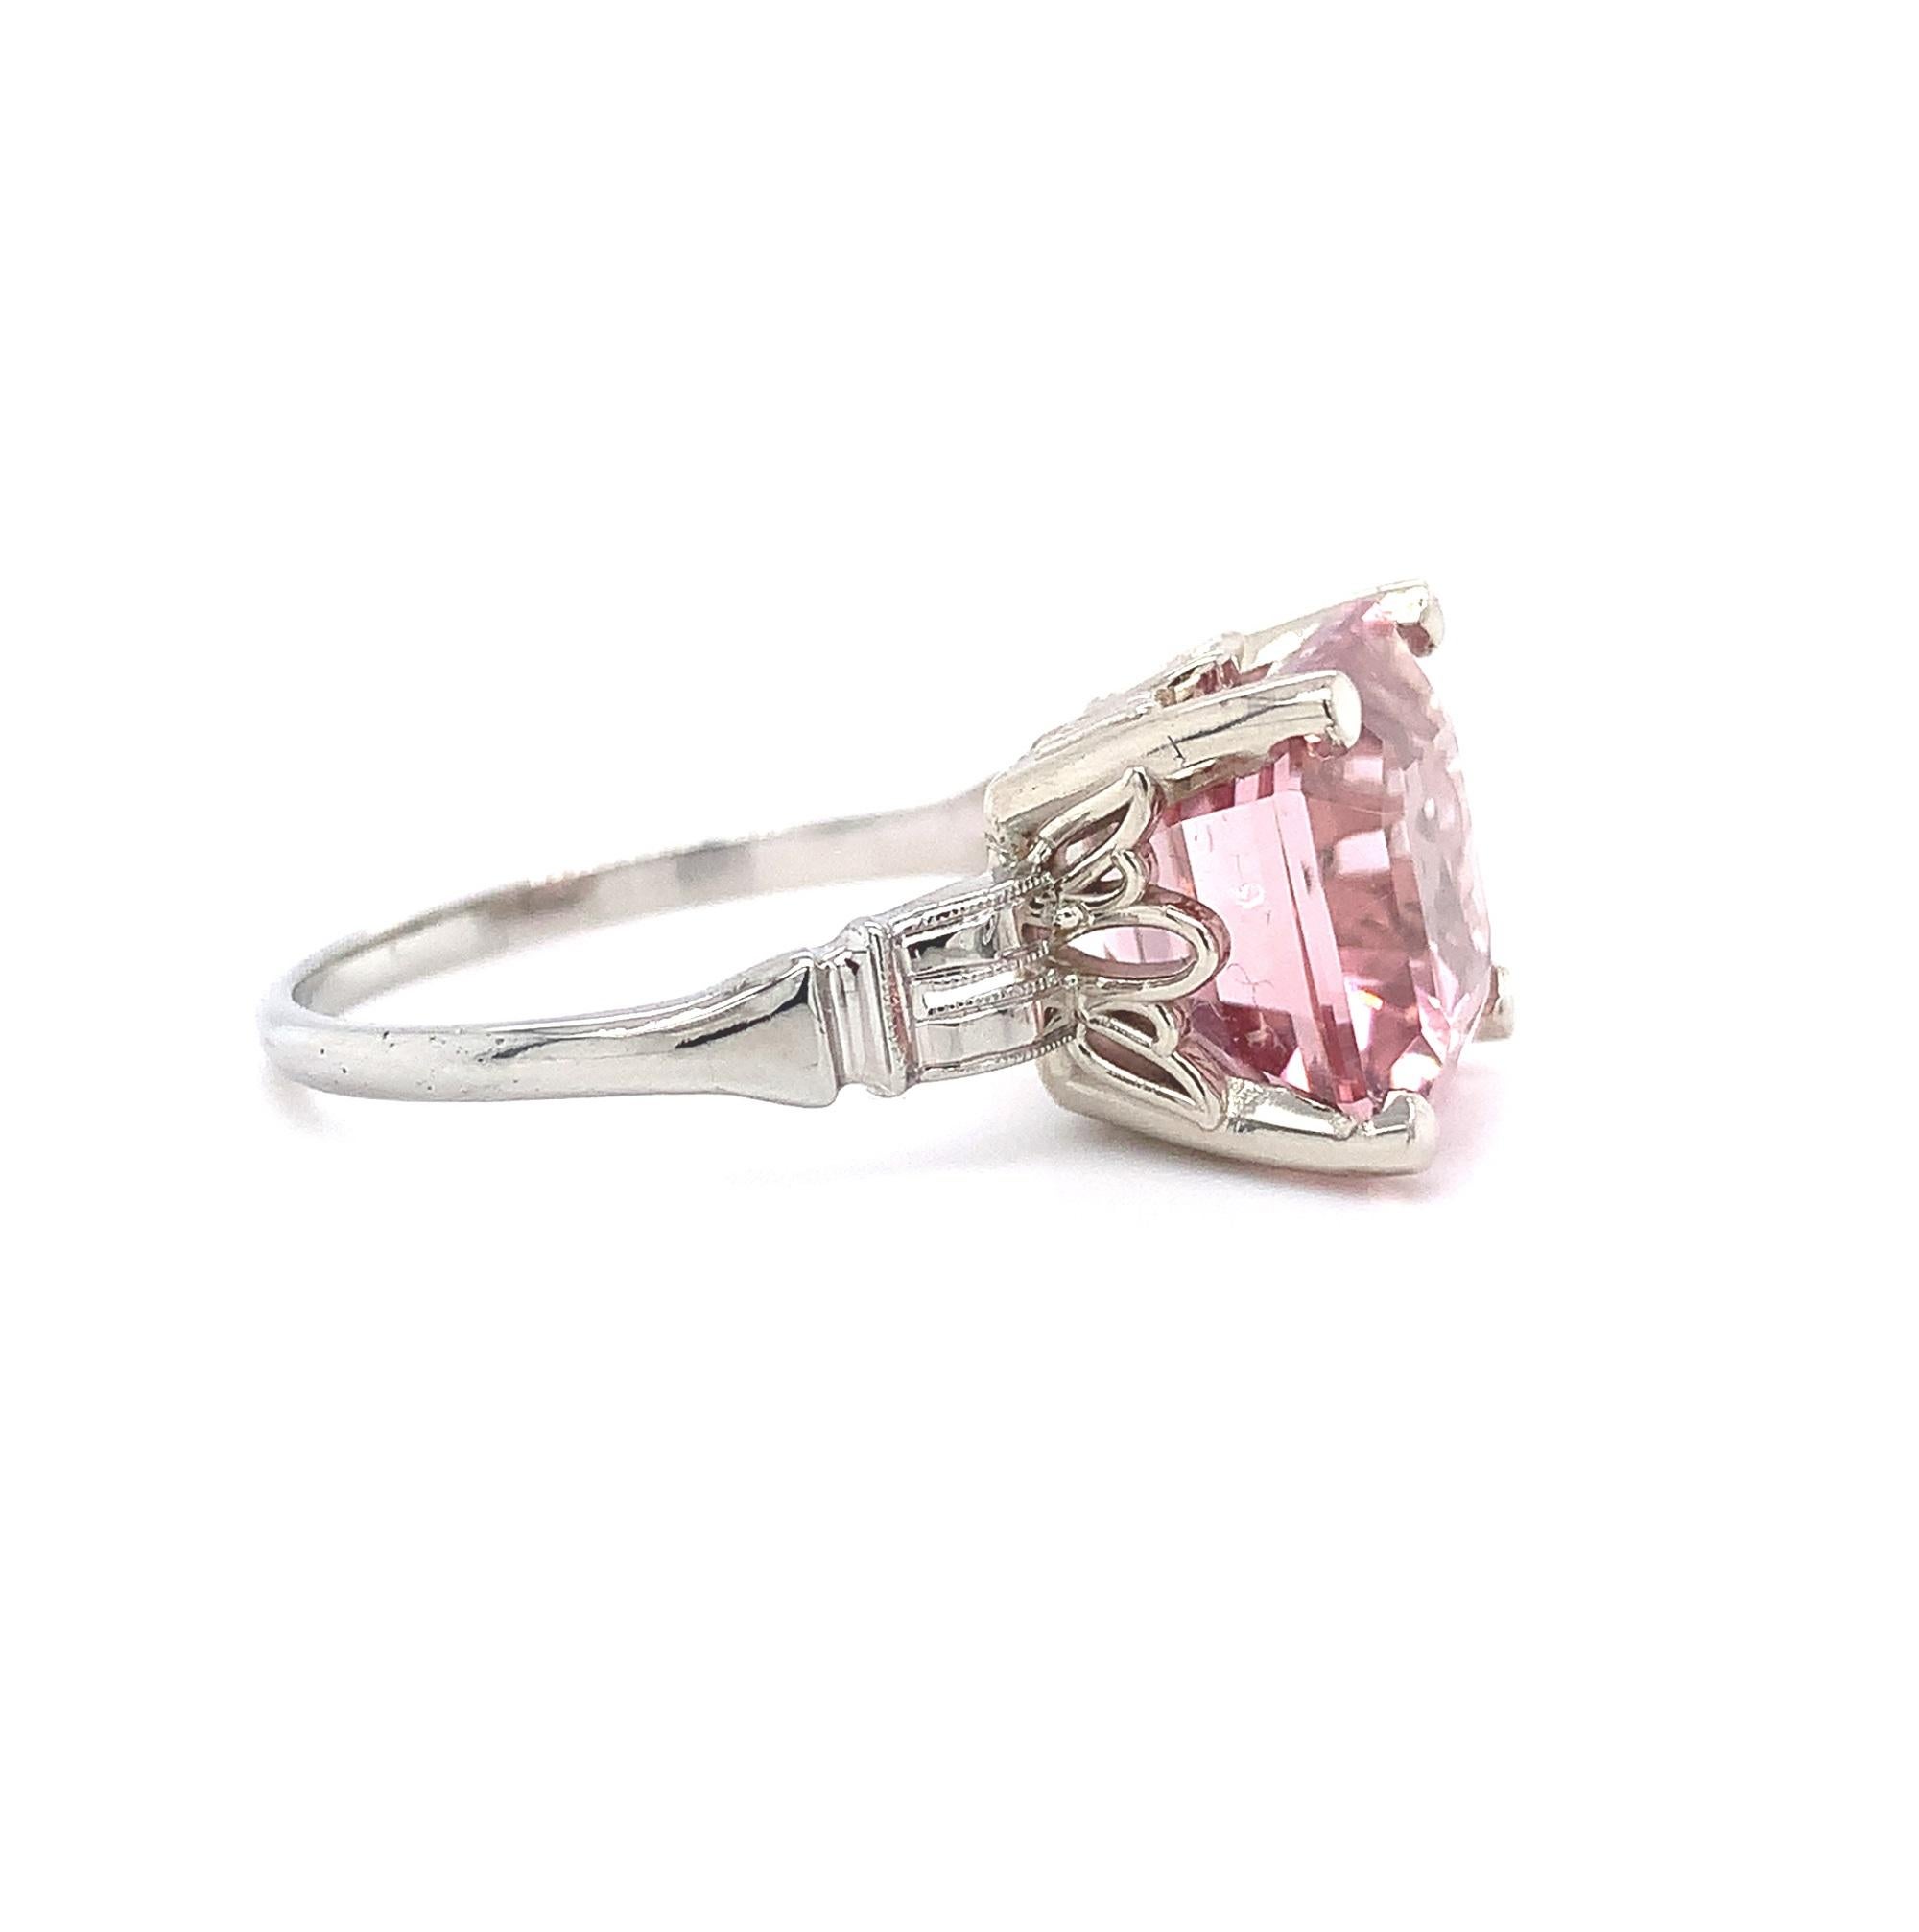 18K white gold  tourmaline and diamond ring featuring a square asscher cut tourmaline weighing 4.98 carats. The tourmaline has light pink color and fine clarity. It measures about 9.5 mm.  The ring fits a size 6 1/2 finger and weighs 2.55dwt. It